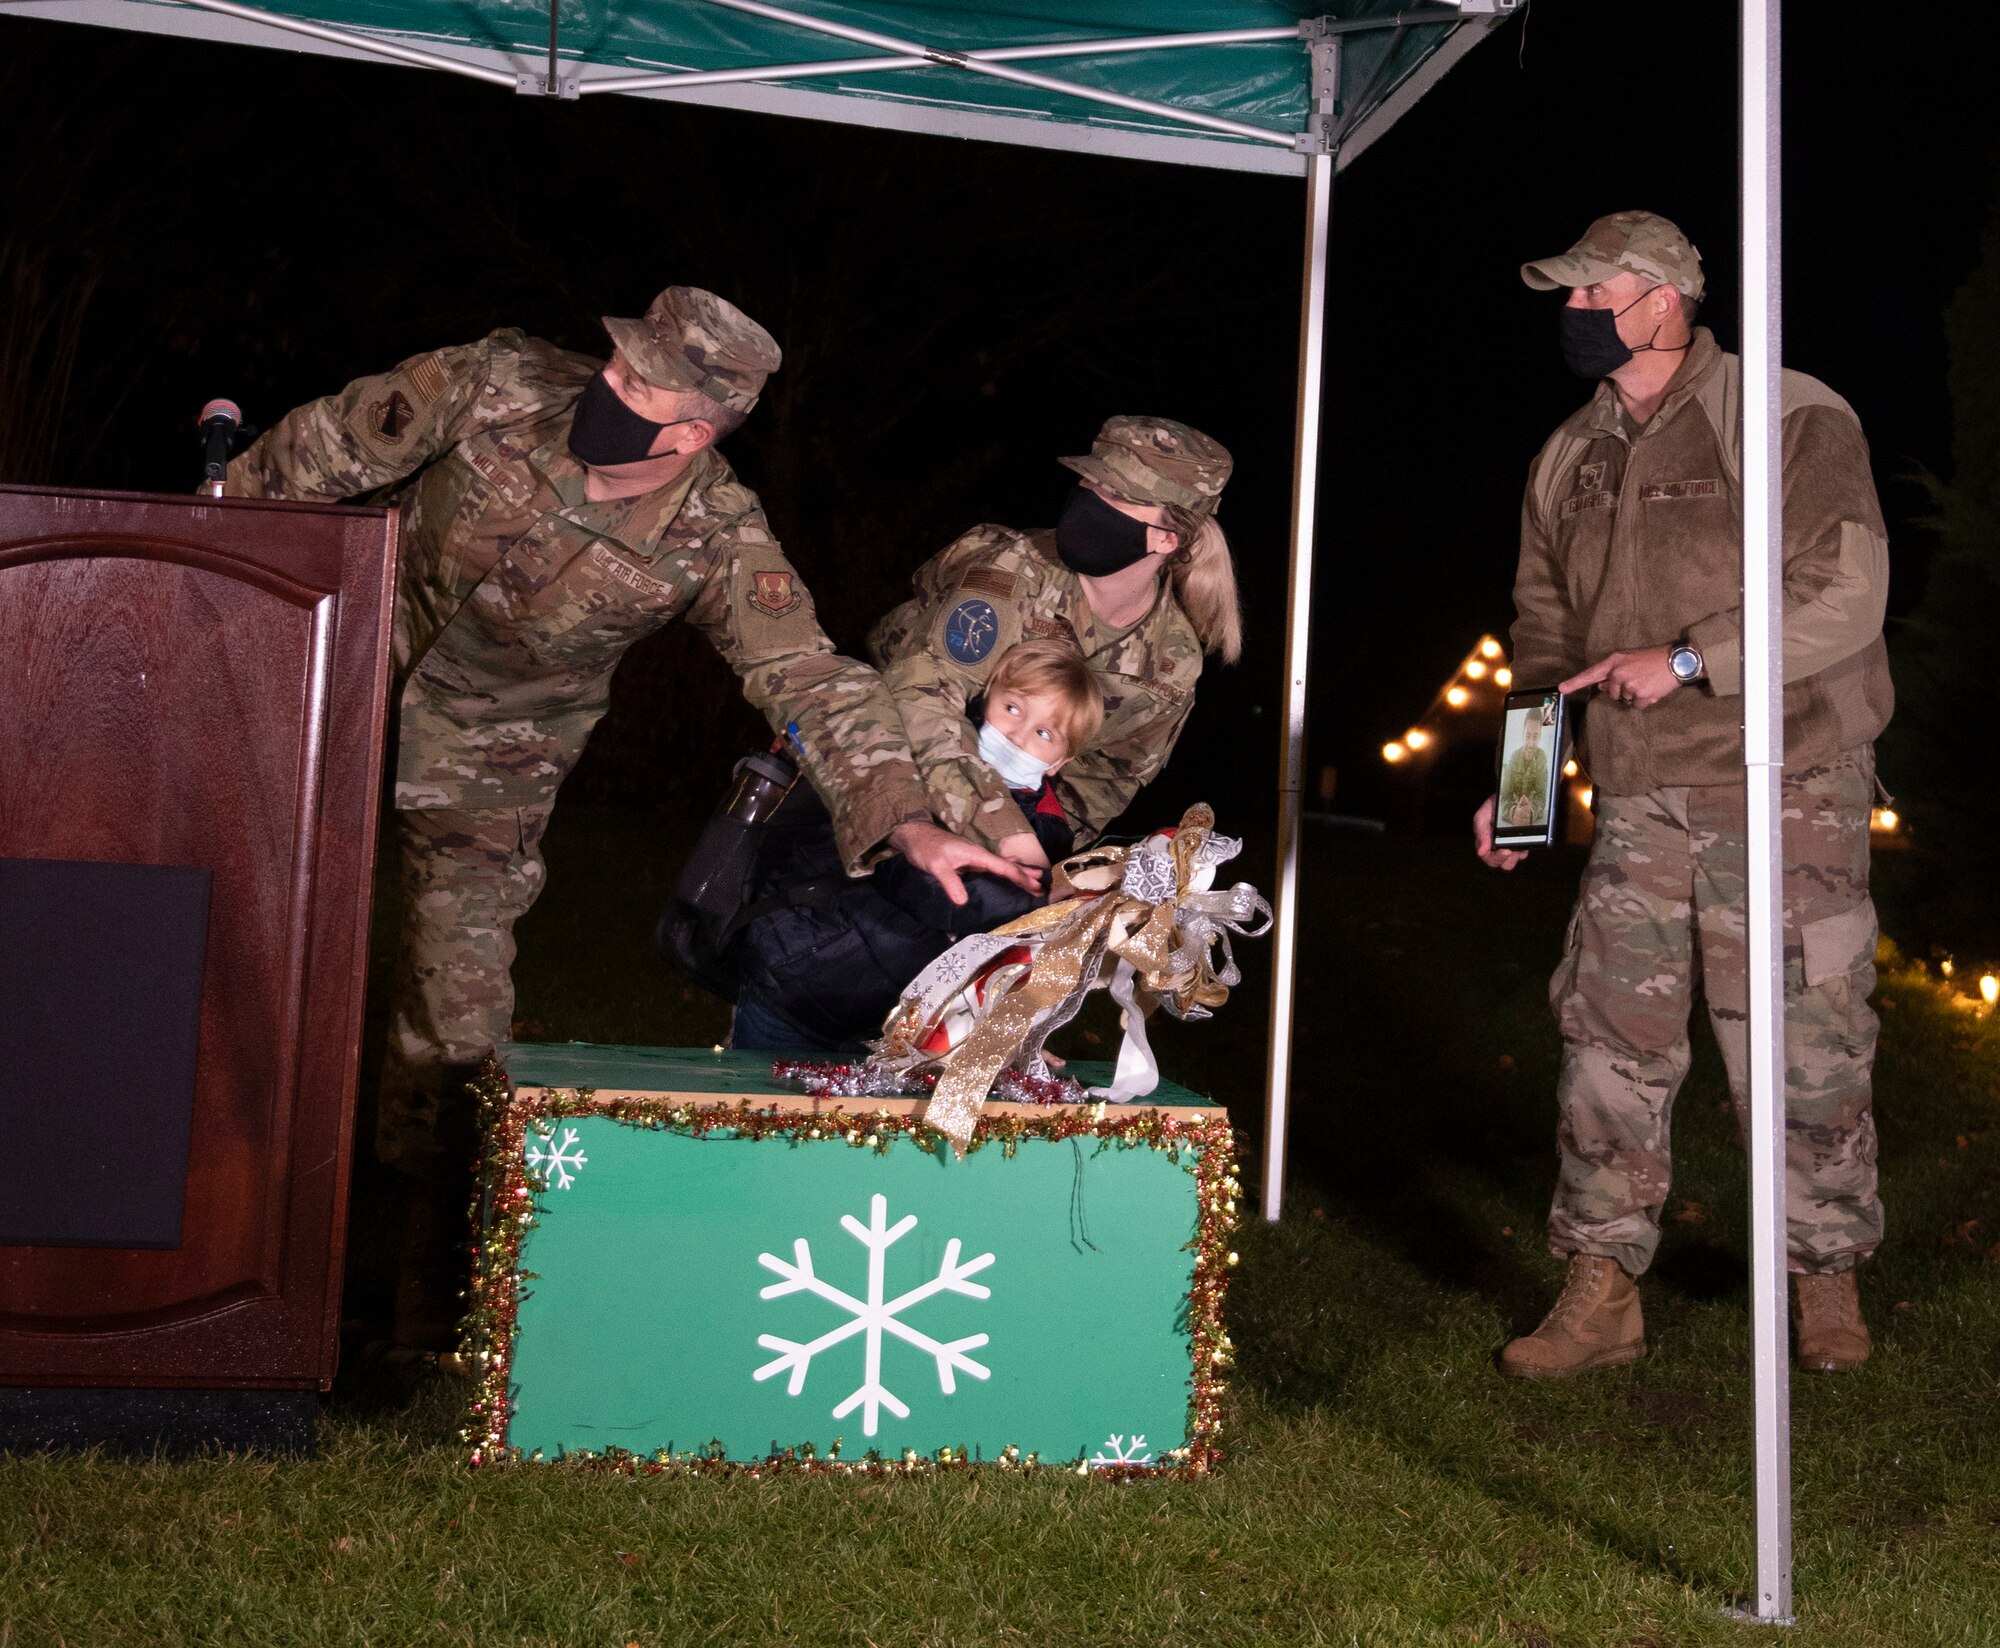 U.S. Air Force Col. Patrick Miller, 88th Air Base Wing and installation commander, is joined by the family of a deployed service member to flip the switch lighting the base Christmas tree during the 2021 Tree Lighting drive-thru event hosted by the 88th Force Support Squadron at Wright-Patterson Air Force Base, Ohio, Dec. 1, 2021. Families were able to go through the drive-thru, get goody bags and hot chocolate from Santa’s elves, and then park to watch the lighting of the base’s Christmas tree over Facebook Live. (U.S. Air Force photo by Jaima Fogg)